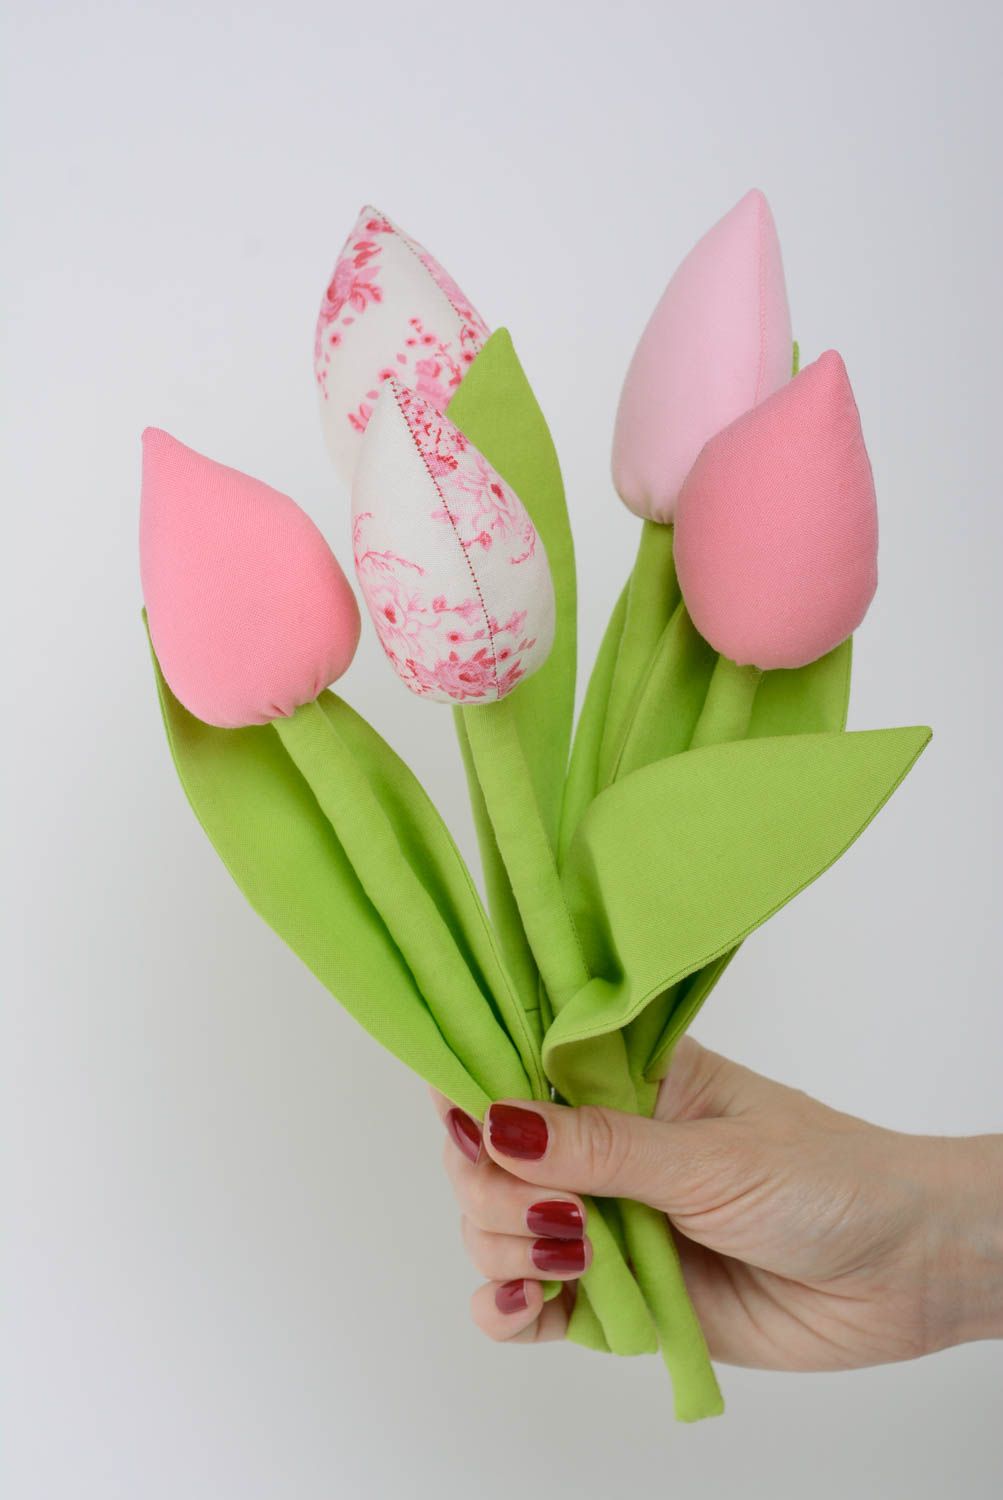 Handmade fabric soft toy flowers for interior decor Pink Tulips photo 4